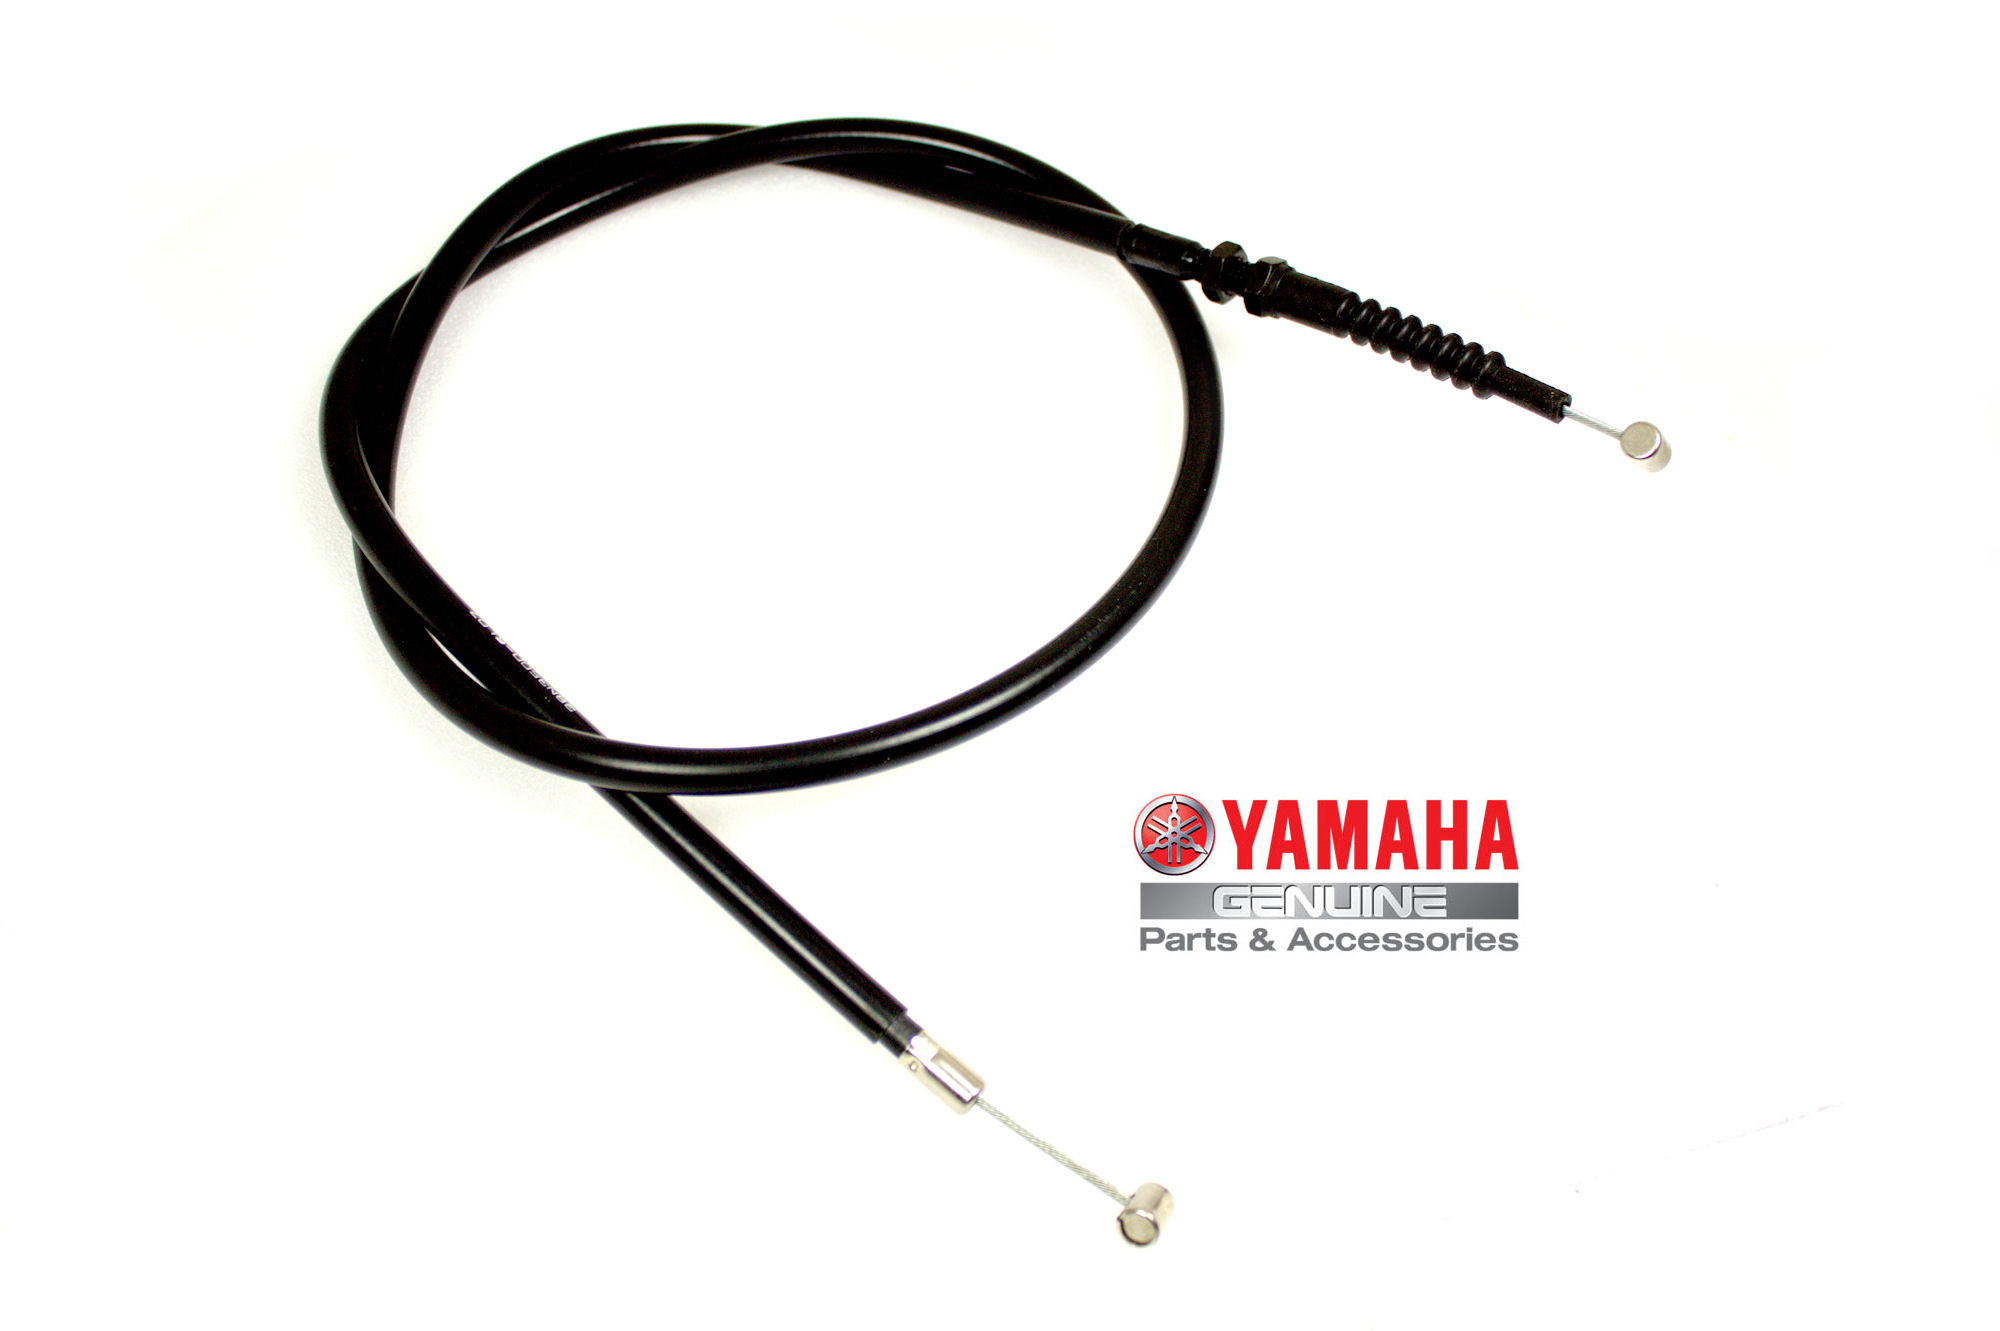 DT125R Clutch Cable Genuine Yamaha 